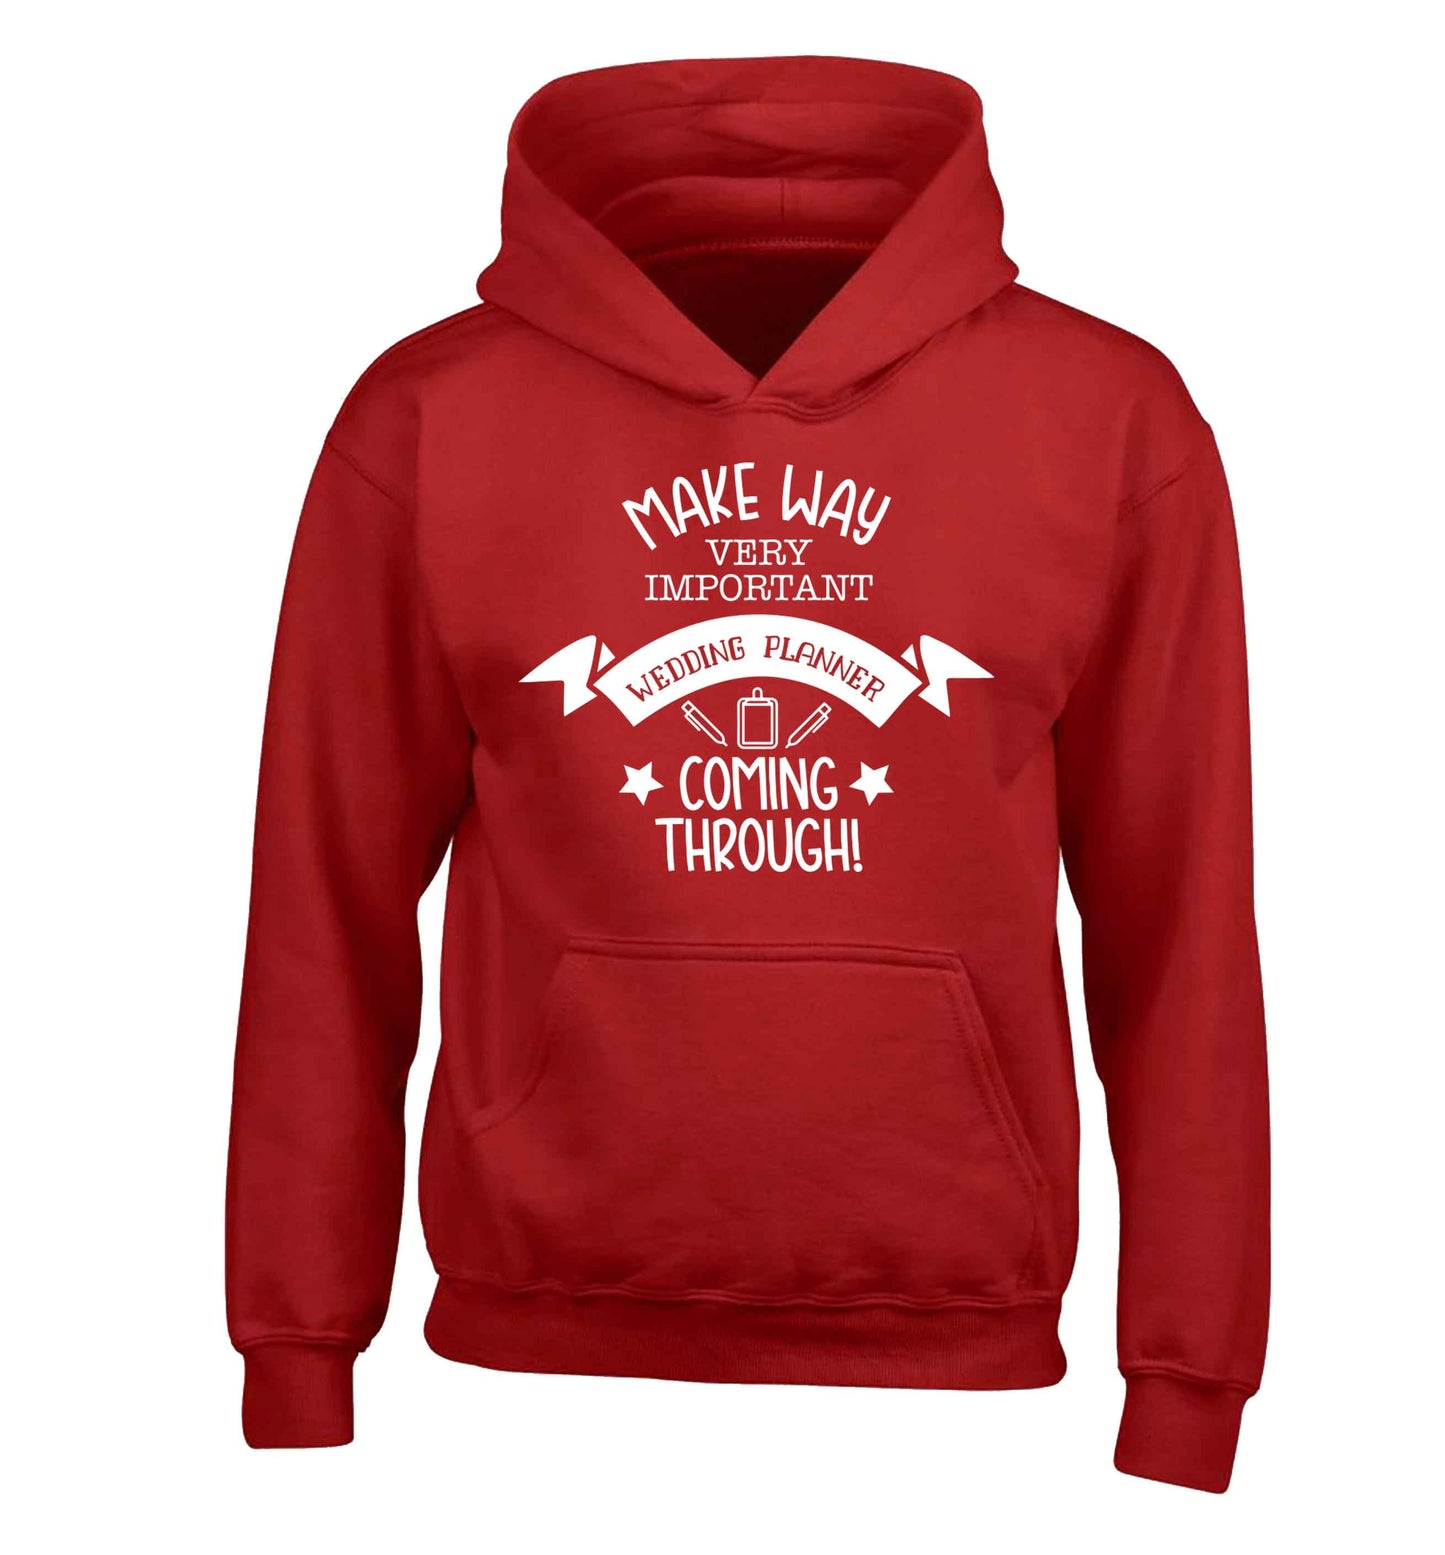 Make way very important wedding planner coming through children's red hoodie 12-13 Years